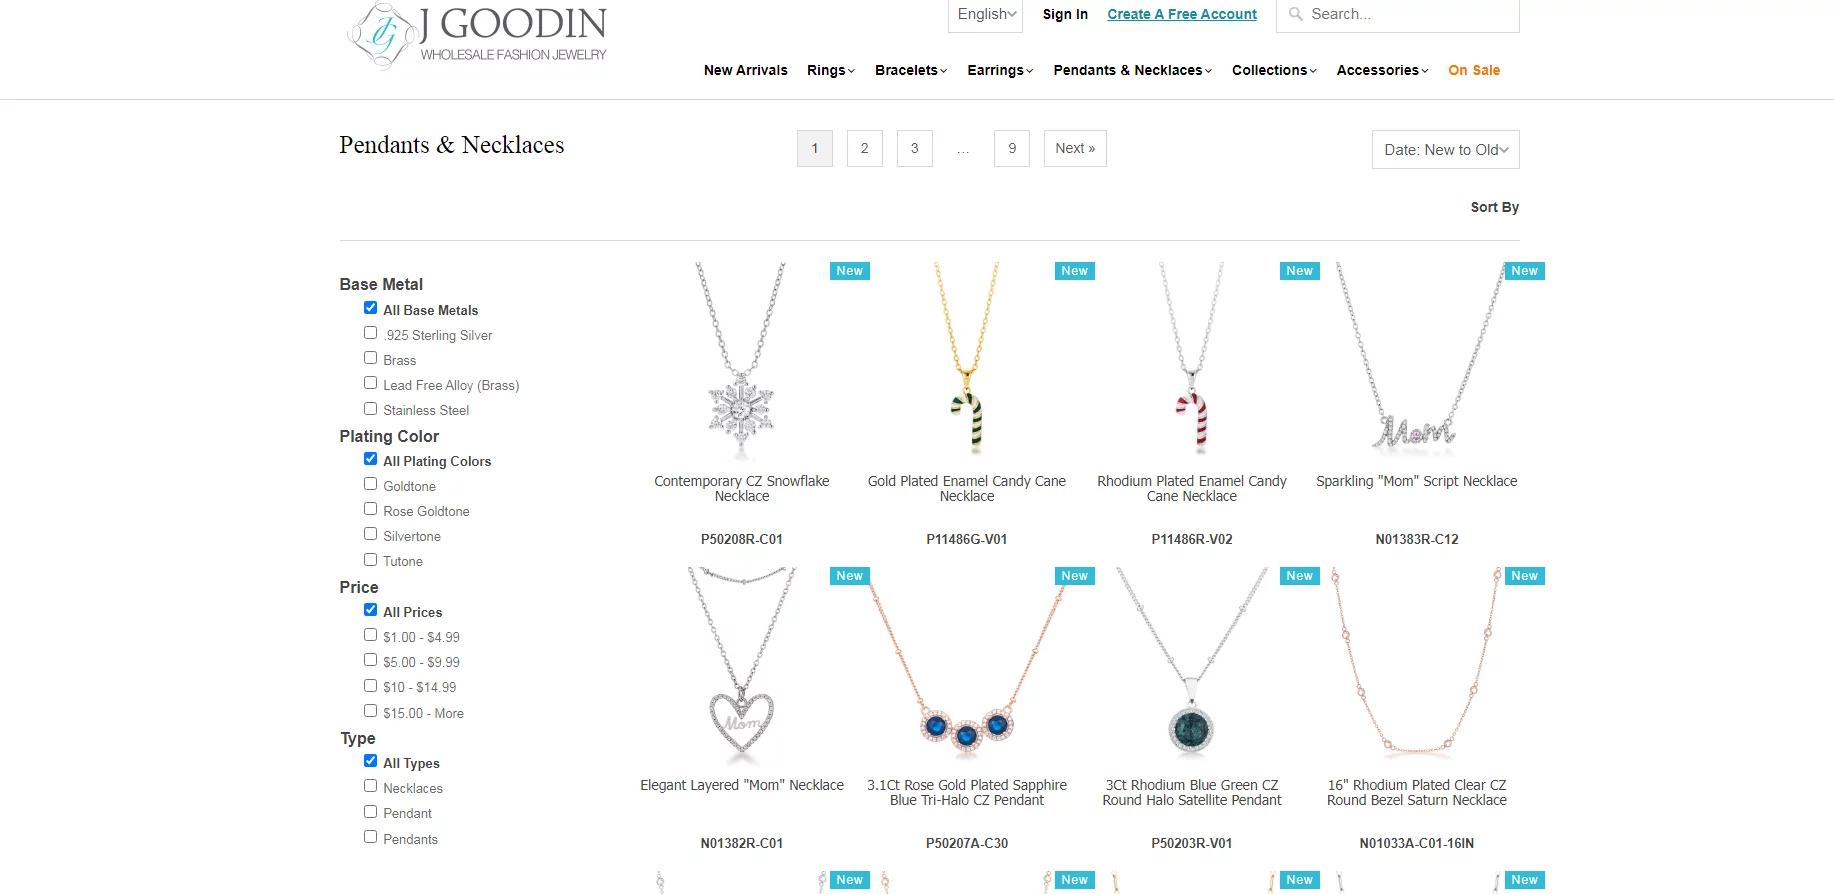 Best Jewelry Dropshipping Suppliers 5: J Goodin